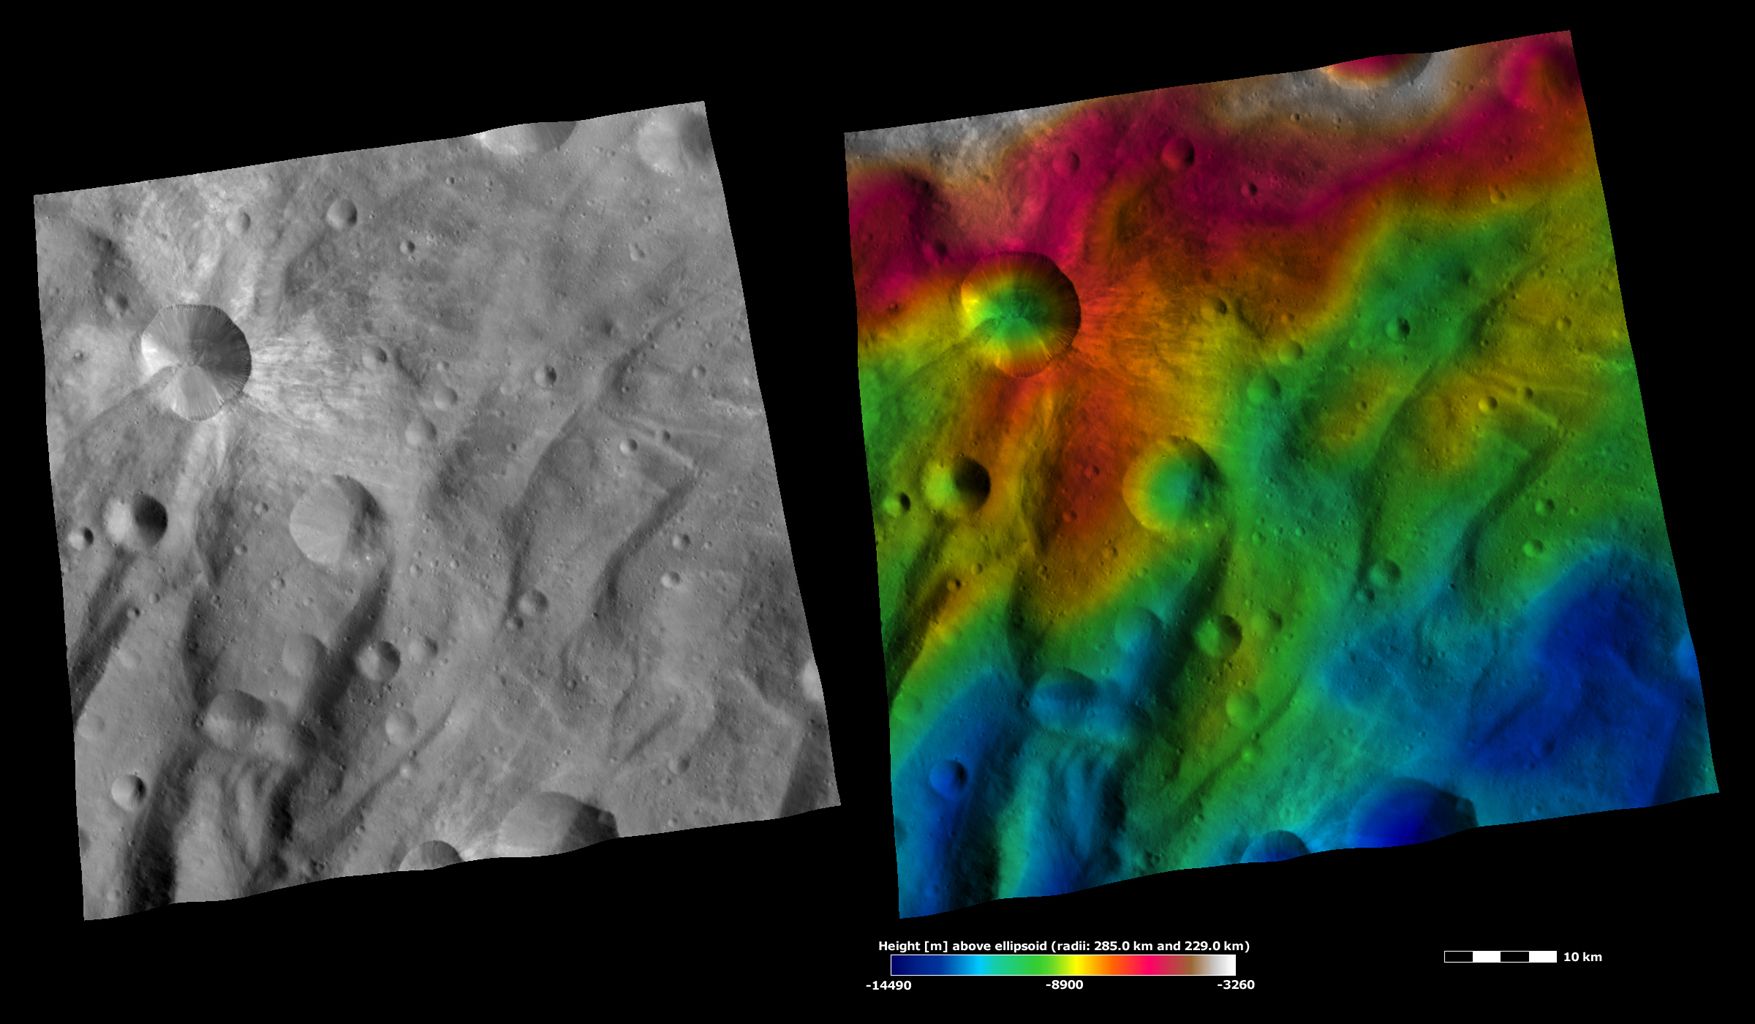 Apparent Brightness and Topography Images of Canuleia Crater